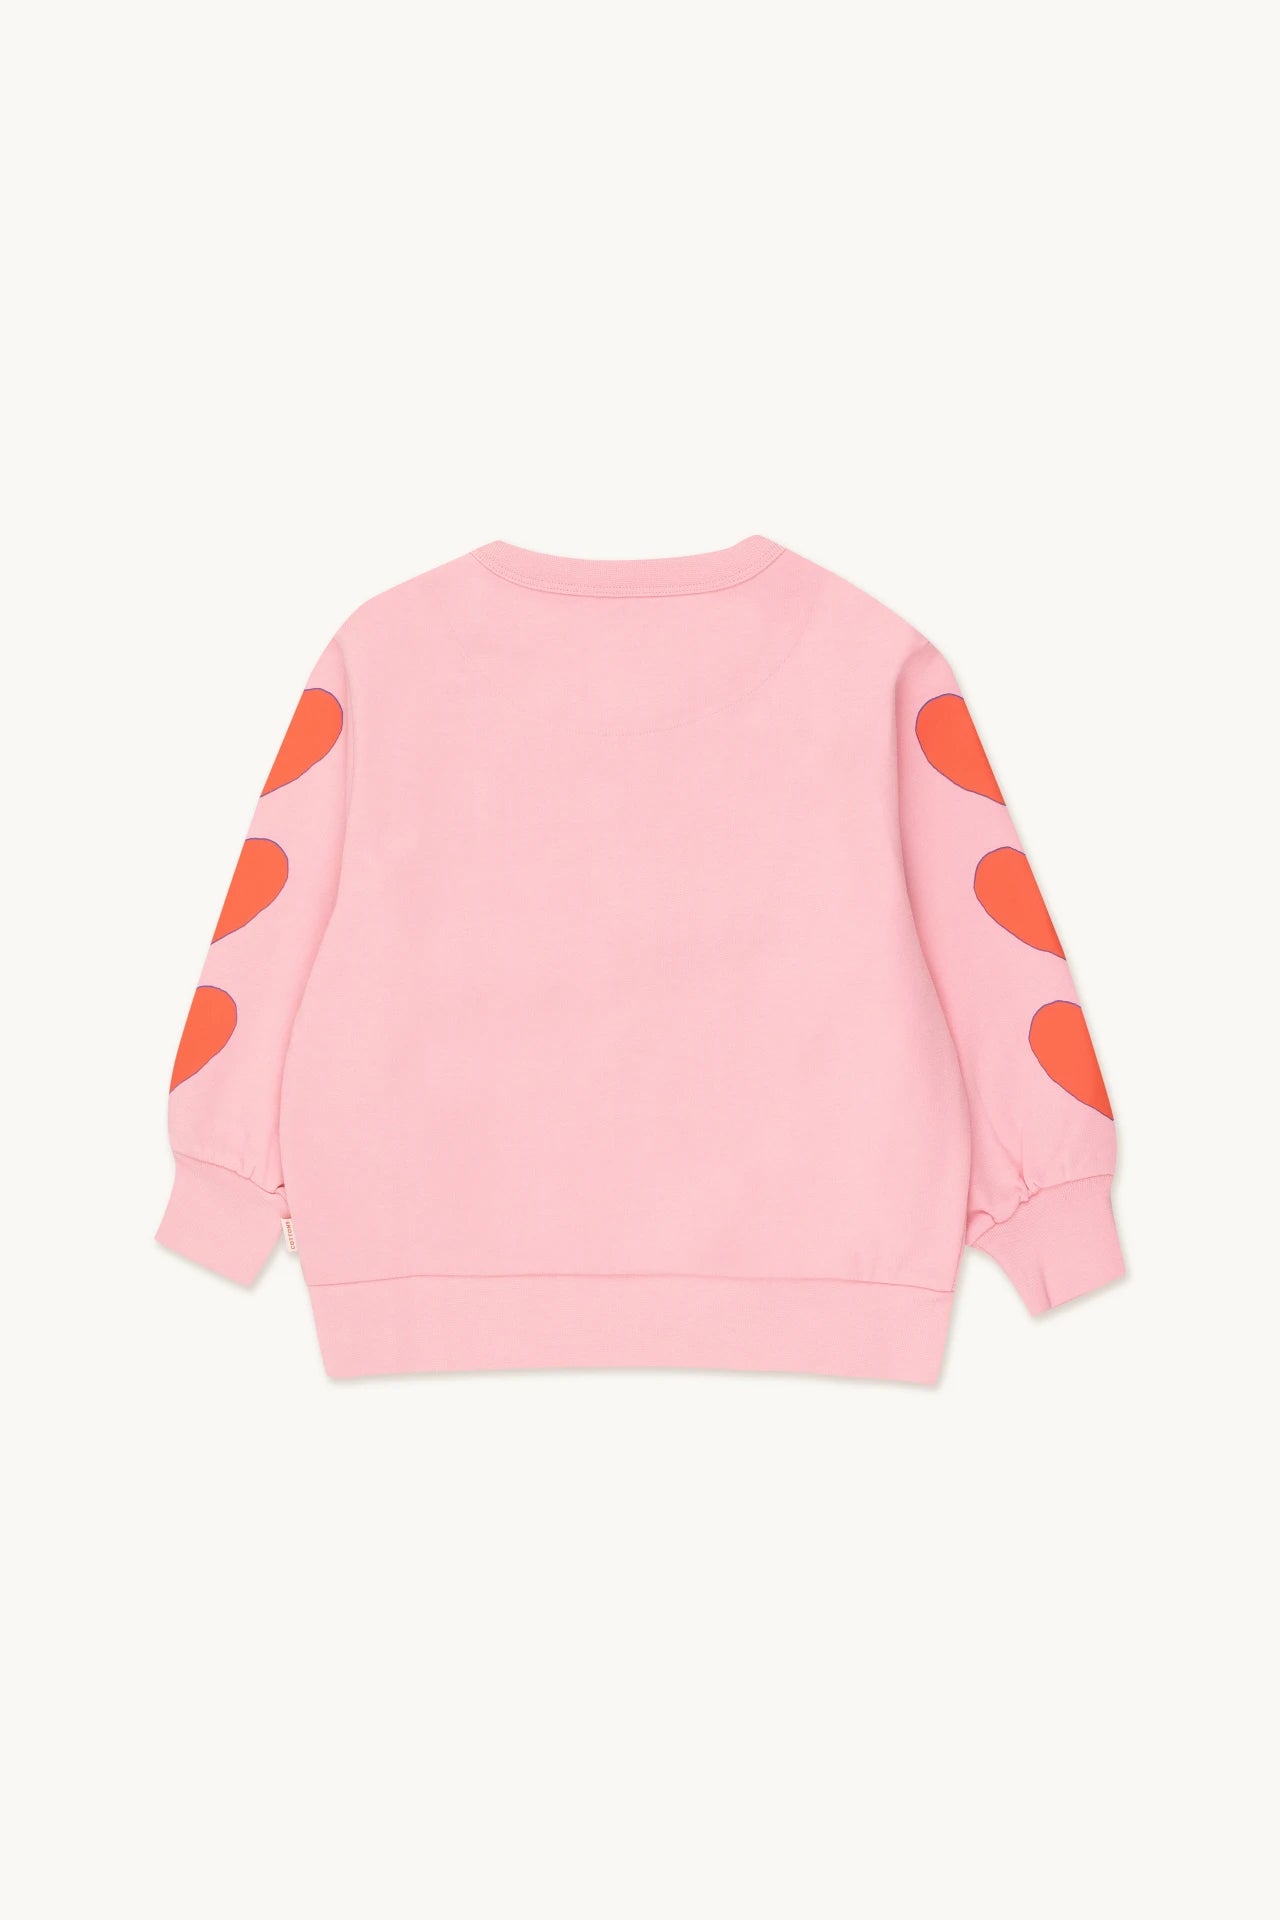 Tiny Cottons Hearts Sweatshirt in Rose Pink